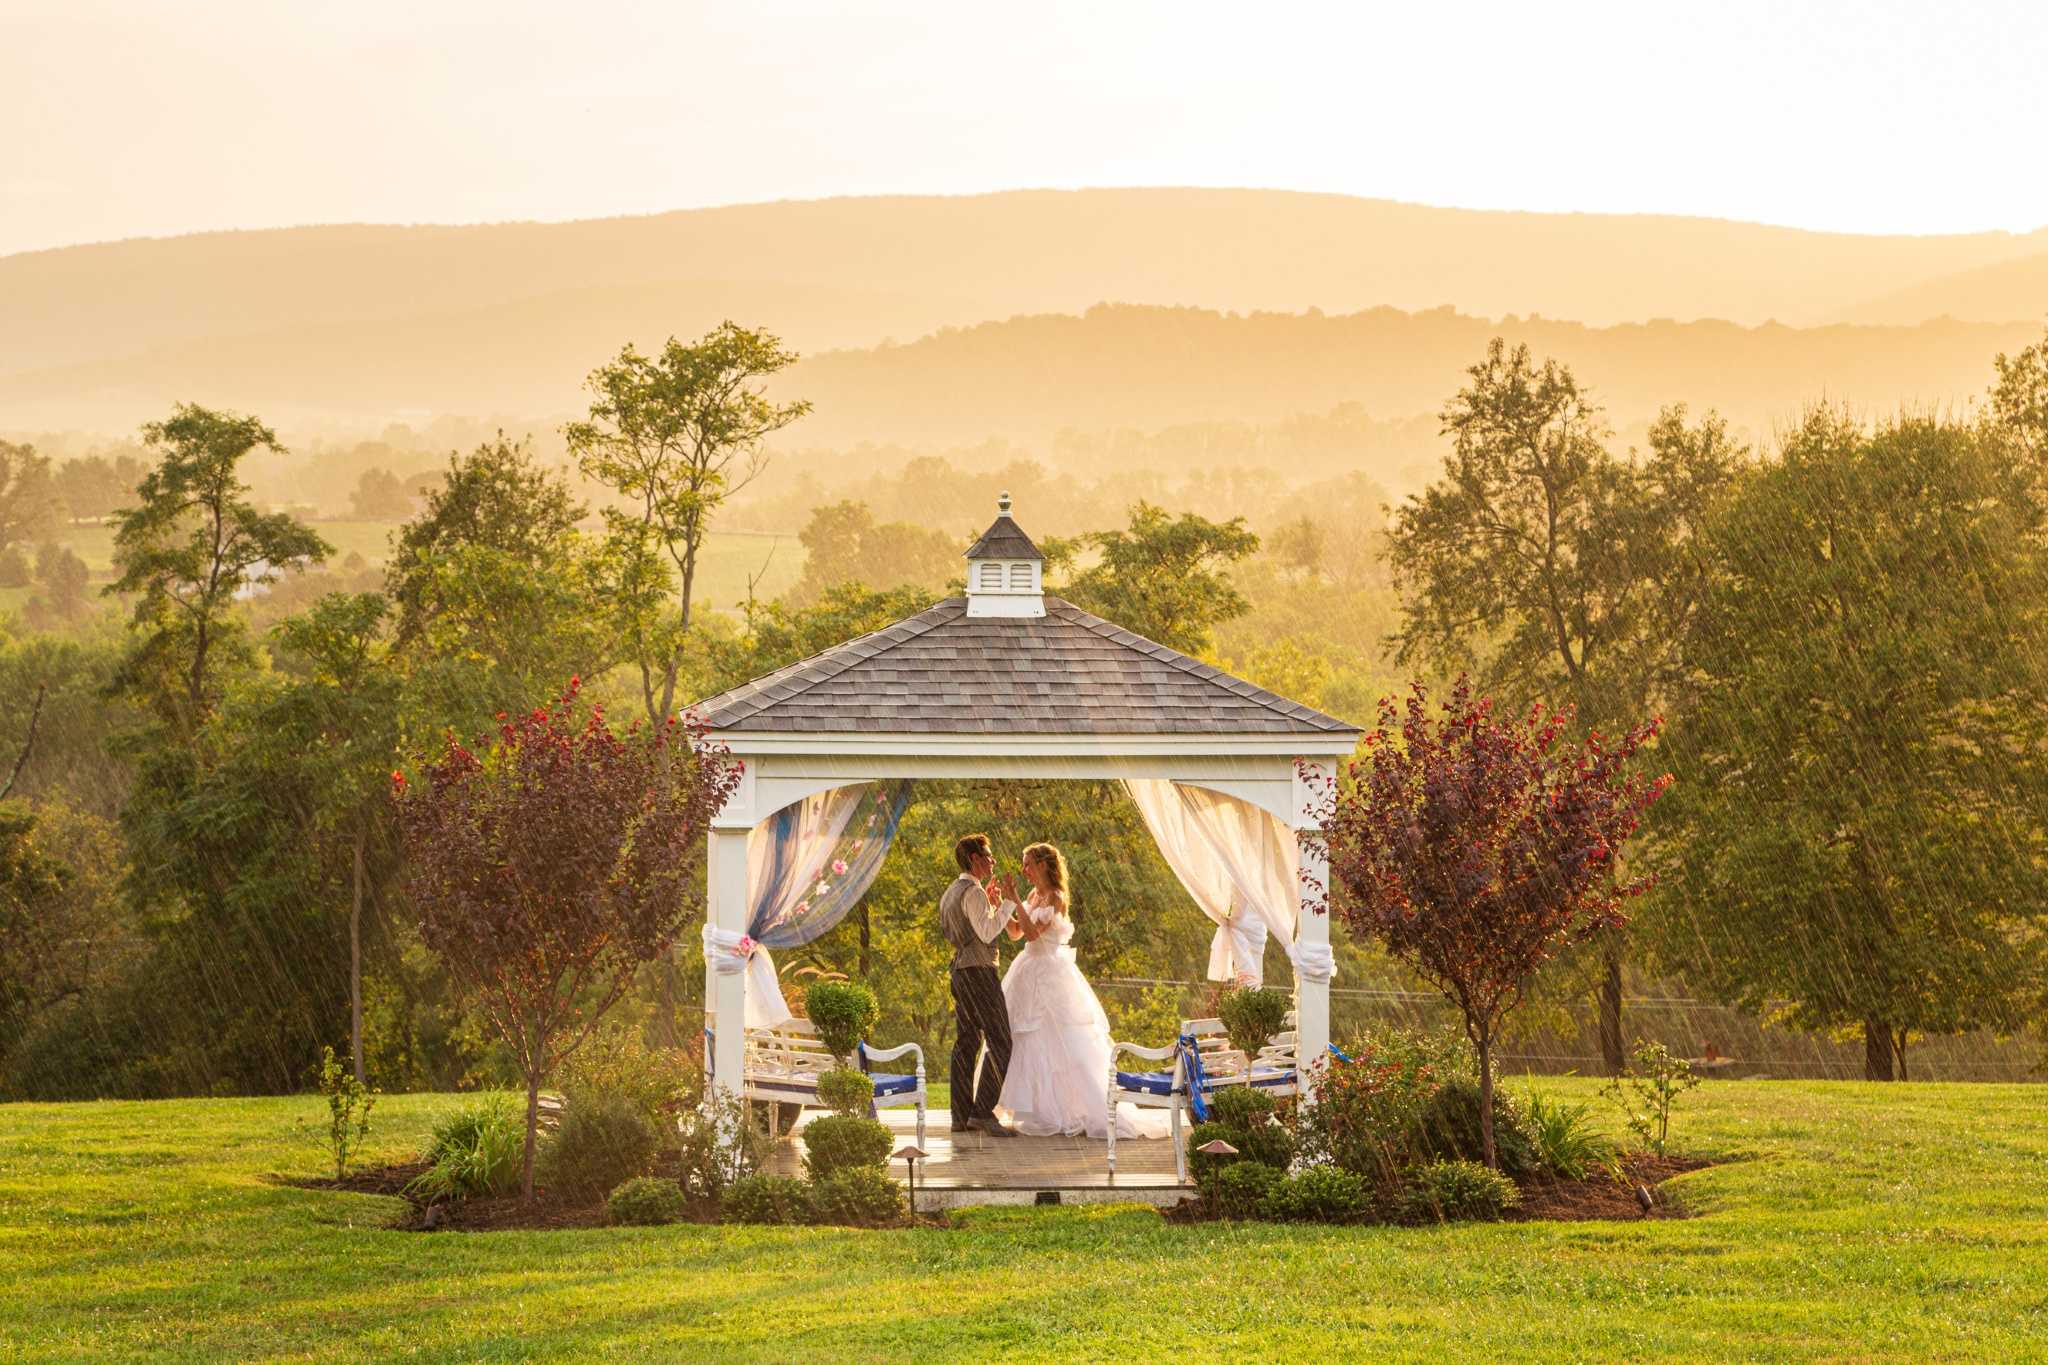 A smiling wedding couple standing in a gazebo at sunset. It is raining lightly.